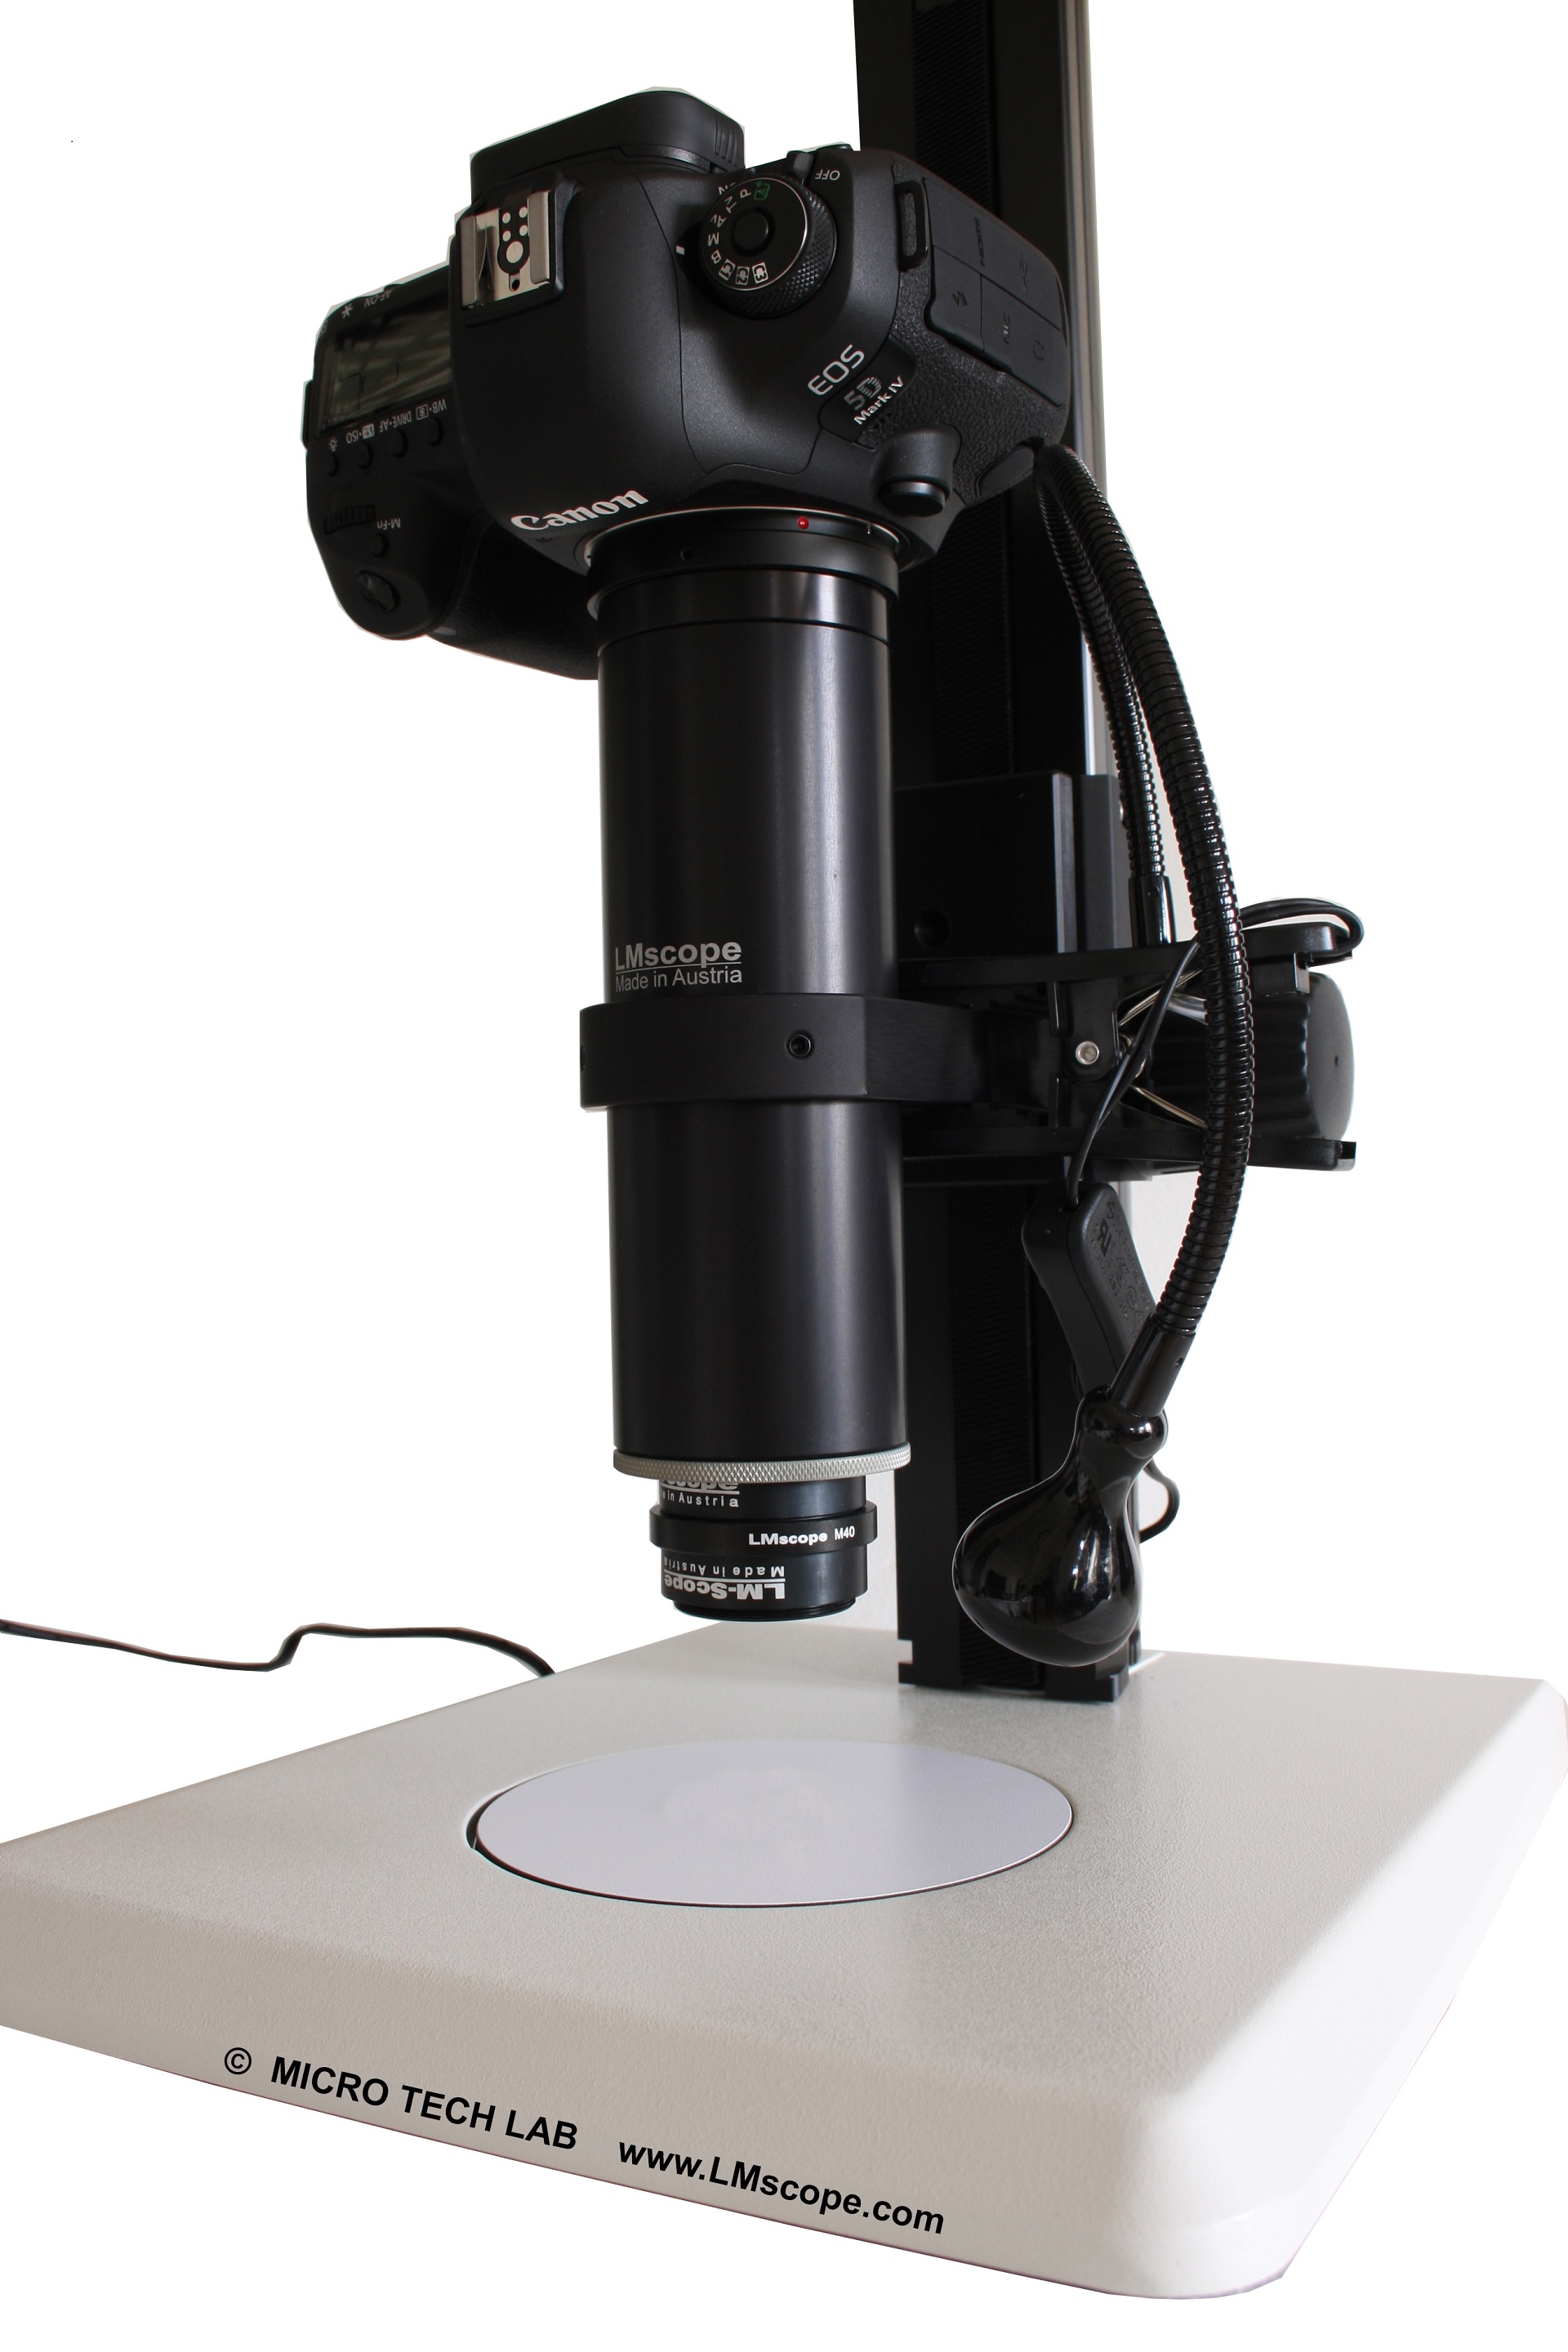 LM photo microscope with Canon EOS 5D Mark IV